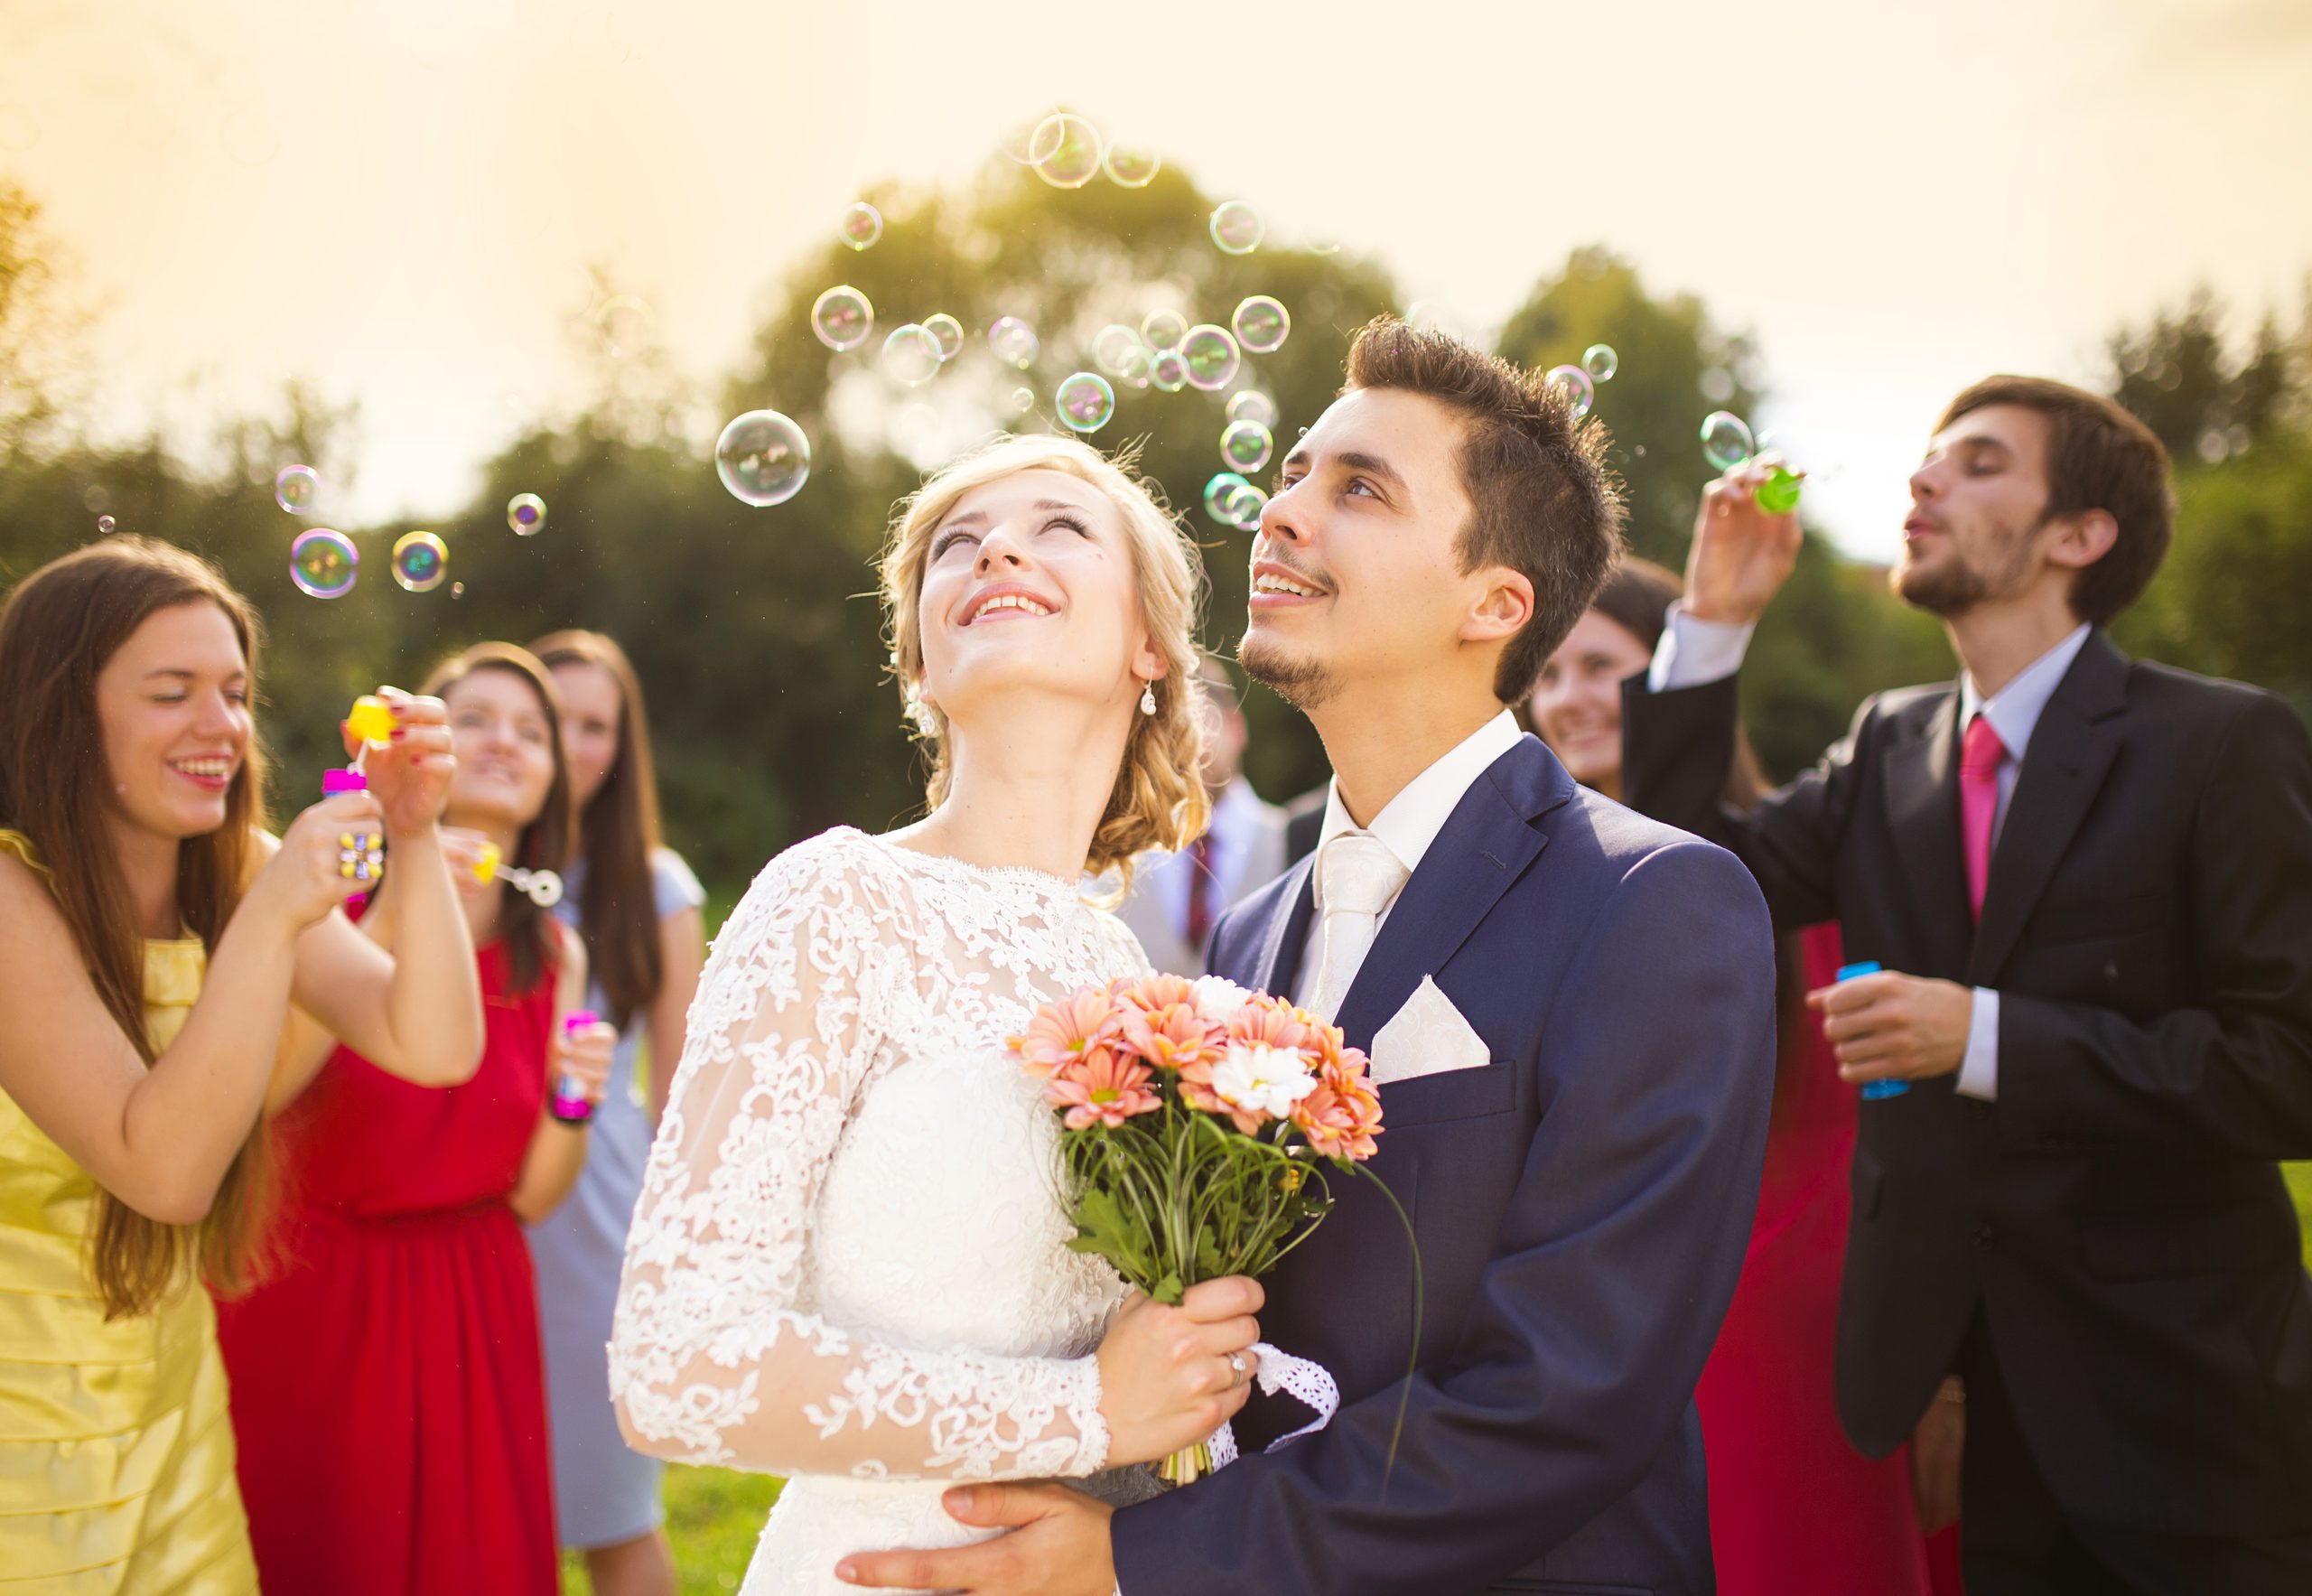 Young newlyweds enjoying romantic moment together at wedding reception outside, wedding guests in background blowing bubbles